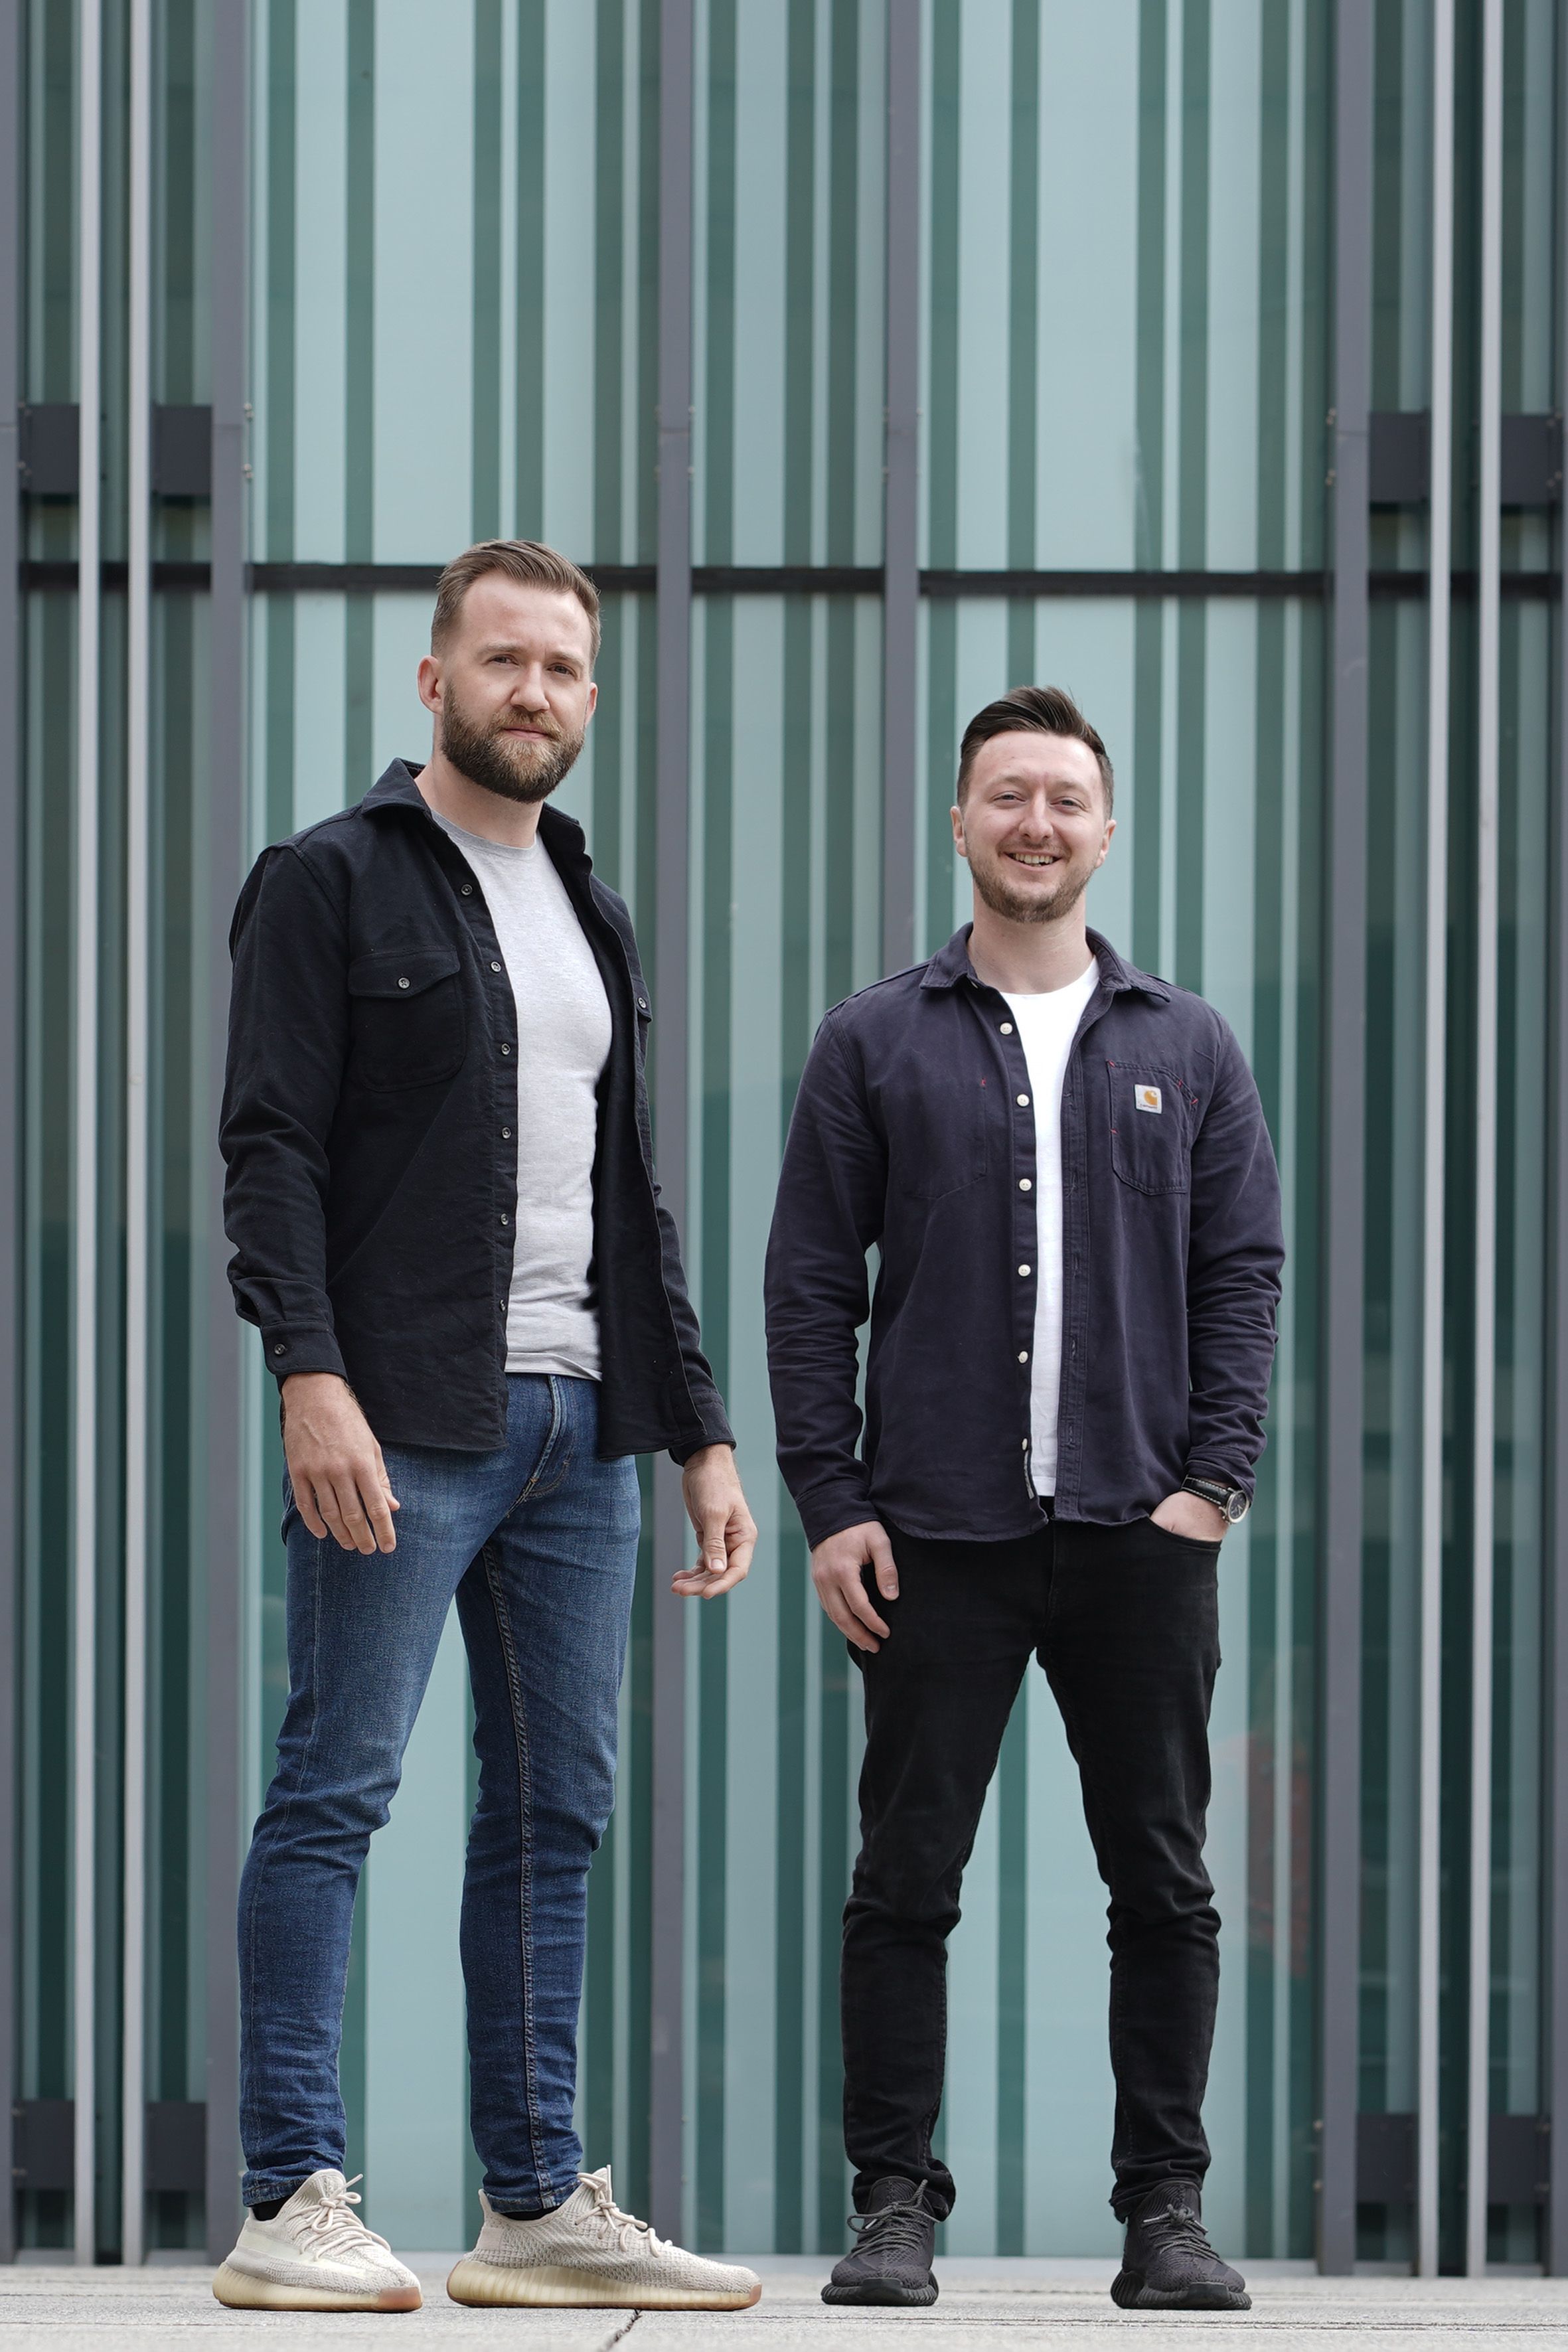 Gigged.AI secures £600,000 investment to scale growth